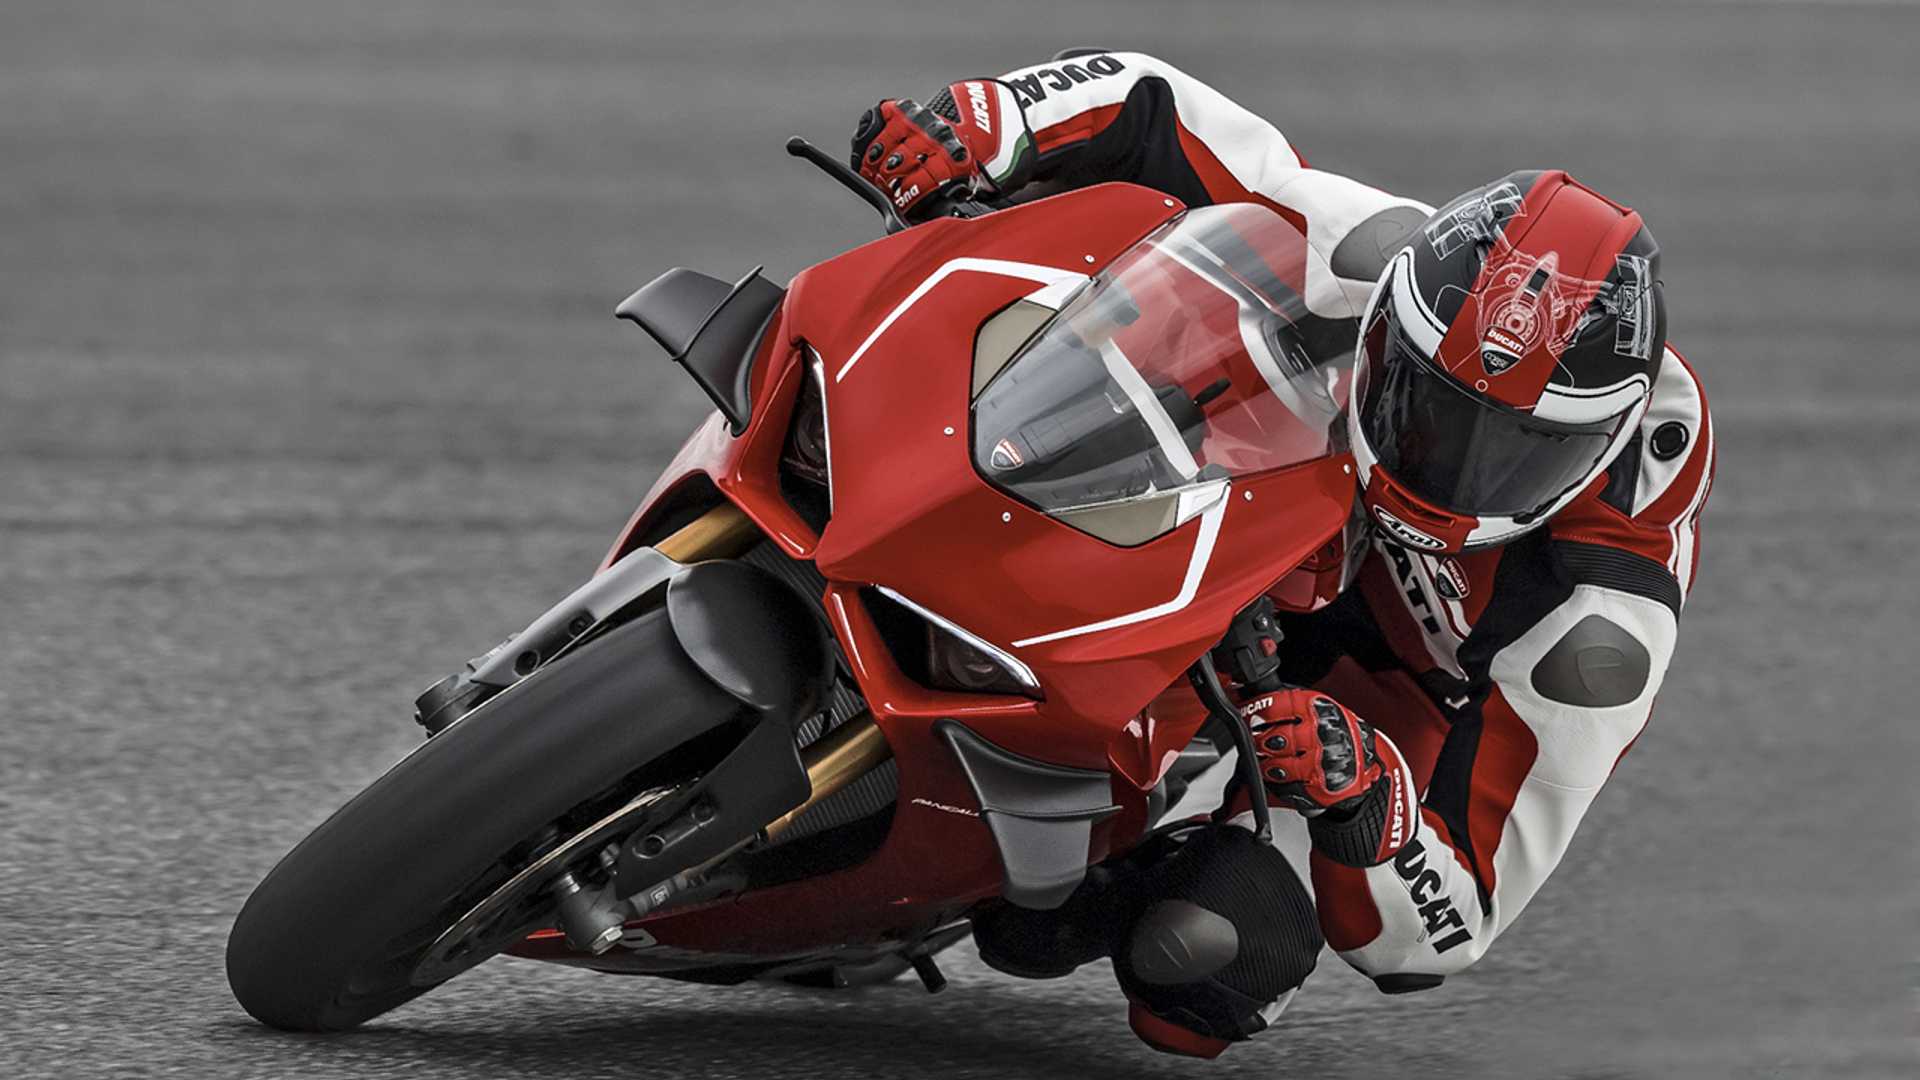 Ducati Panigale V4 R: Everything We Know